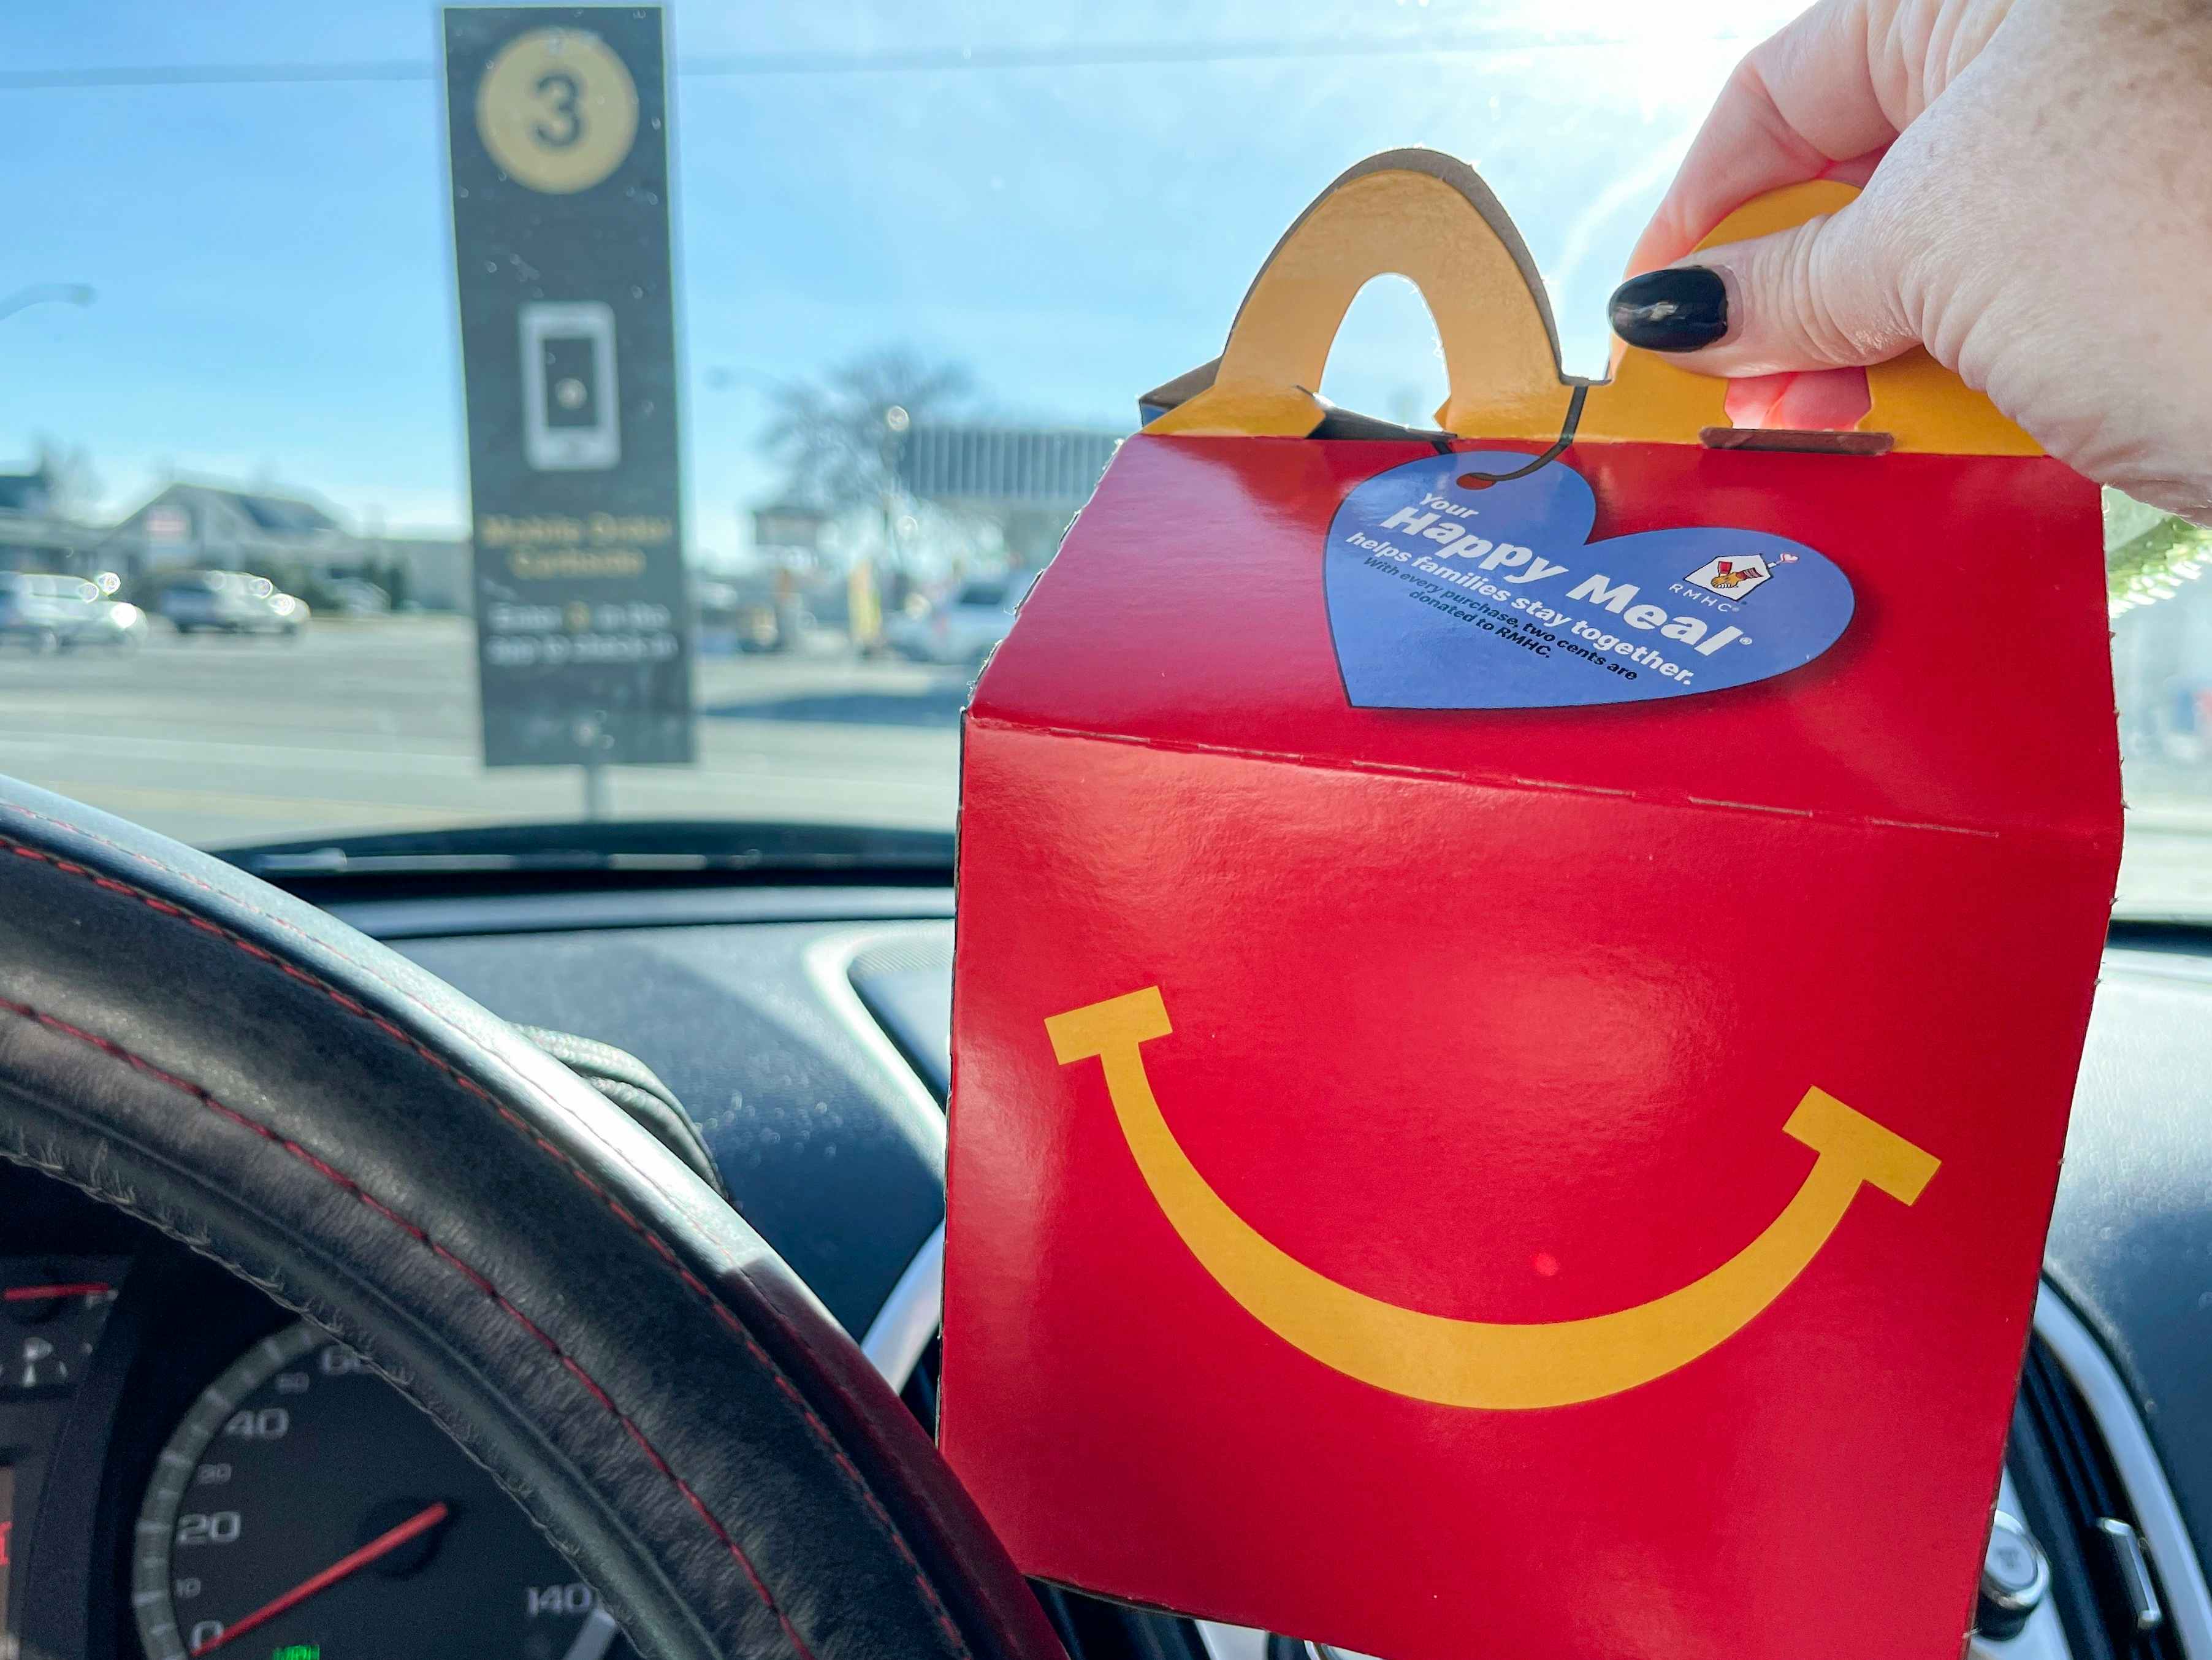 happy meal being held up